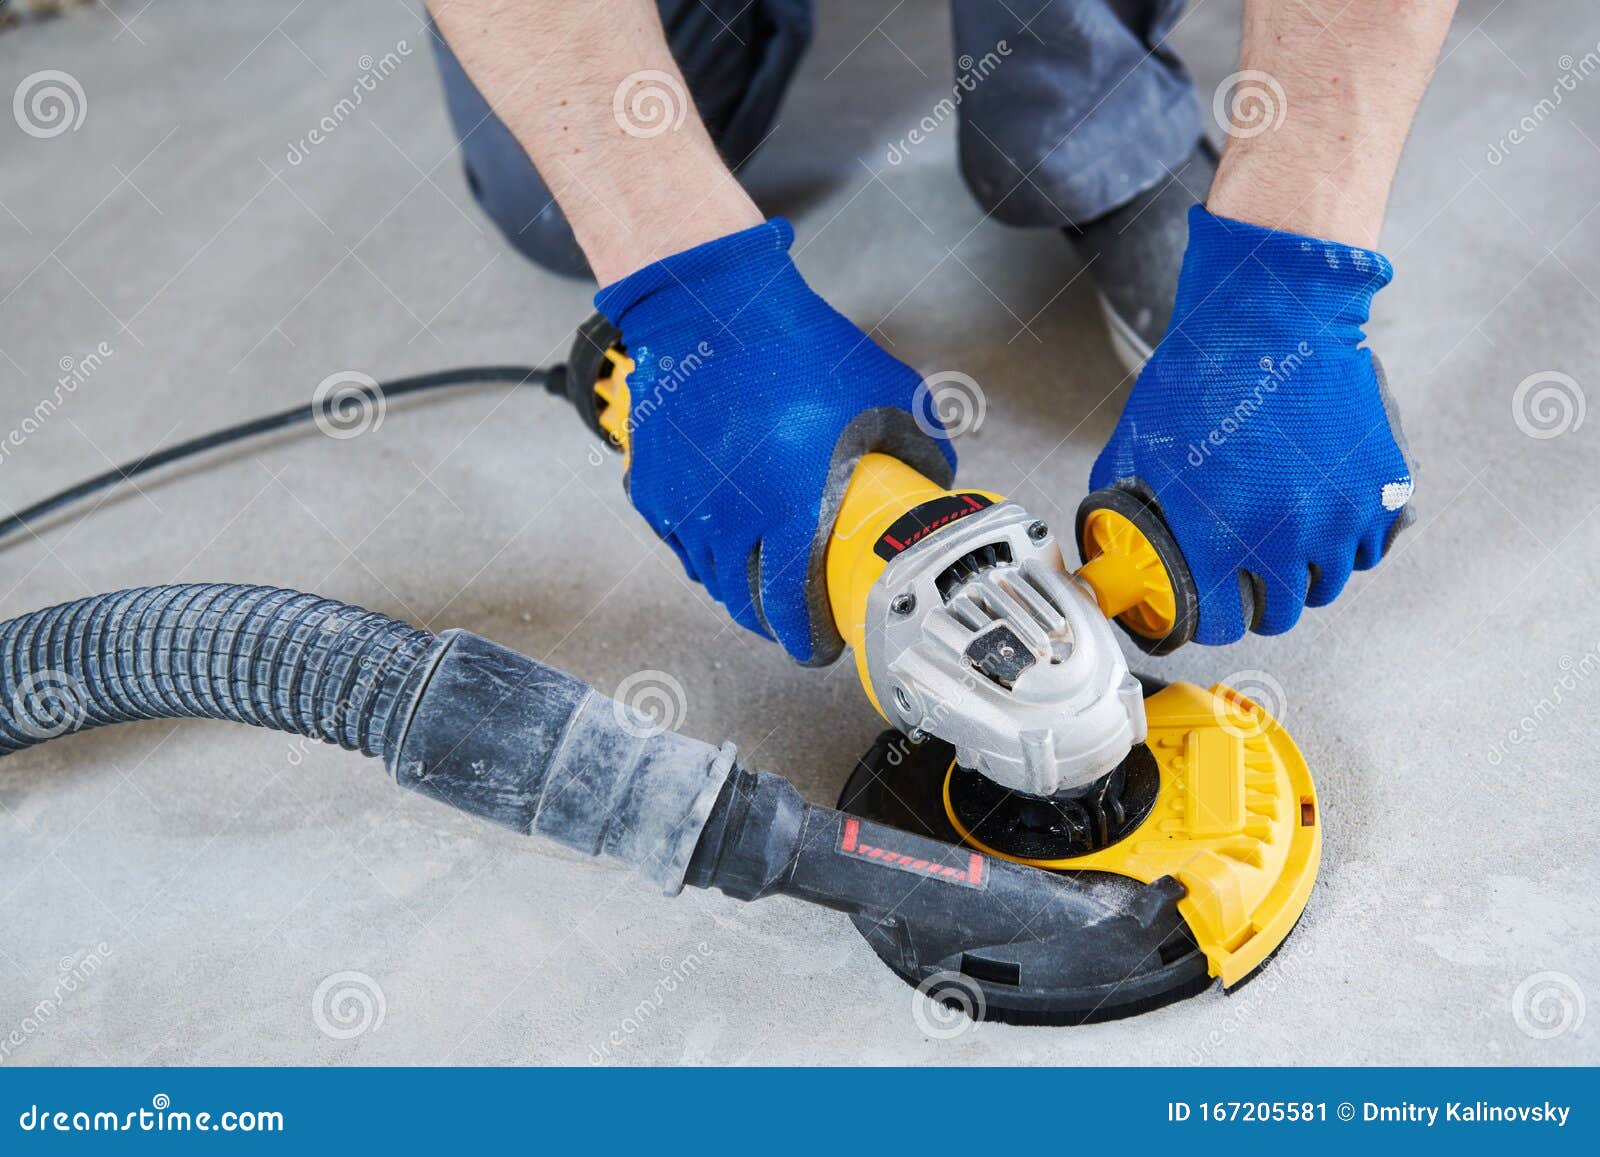 concrete floor surface grinding by angle grinder machine